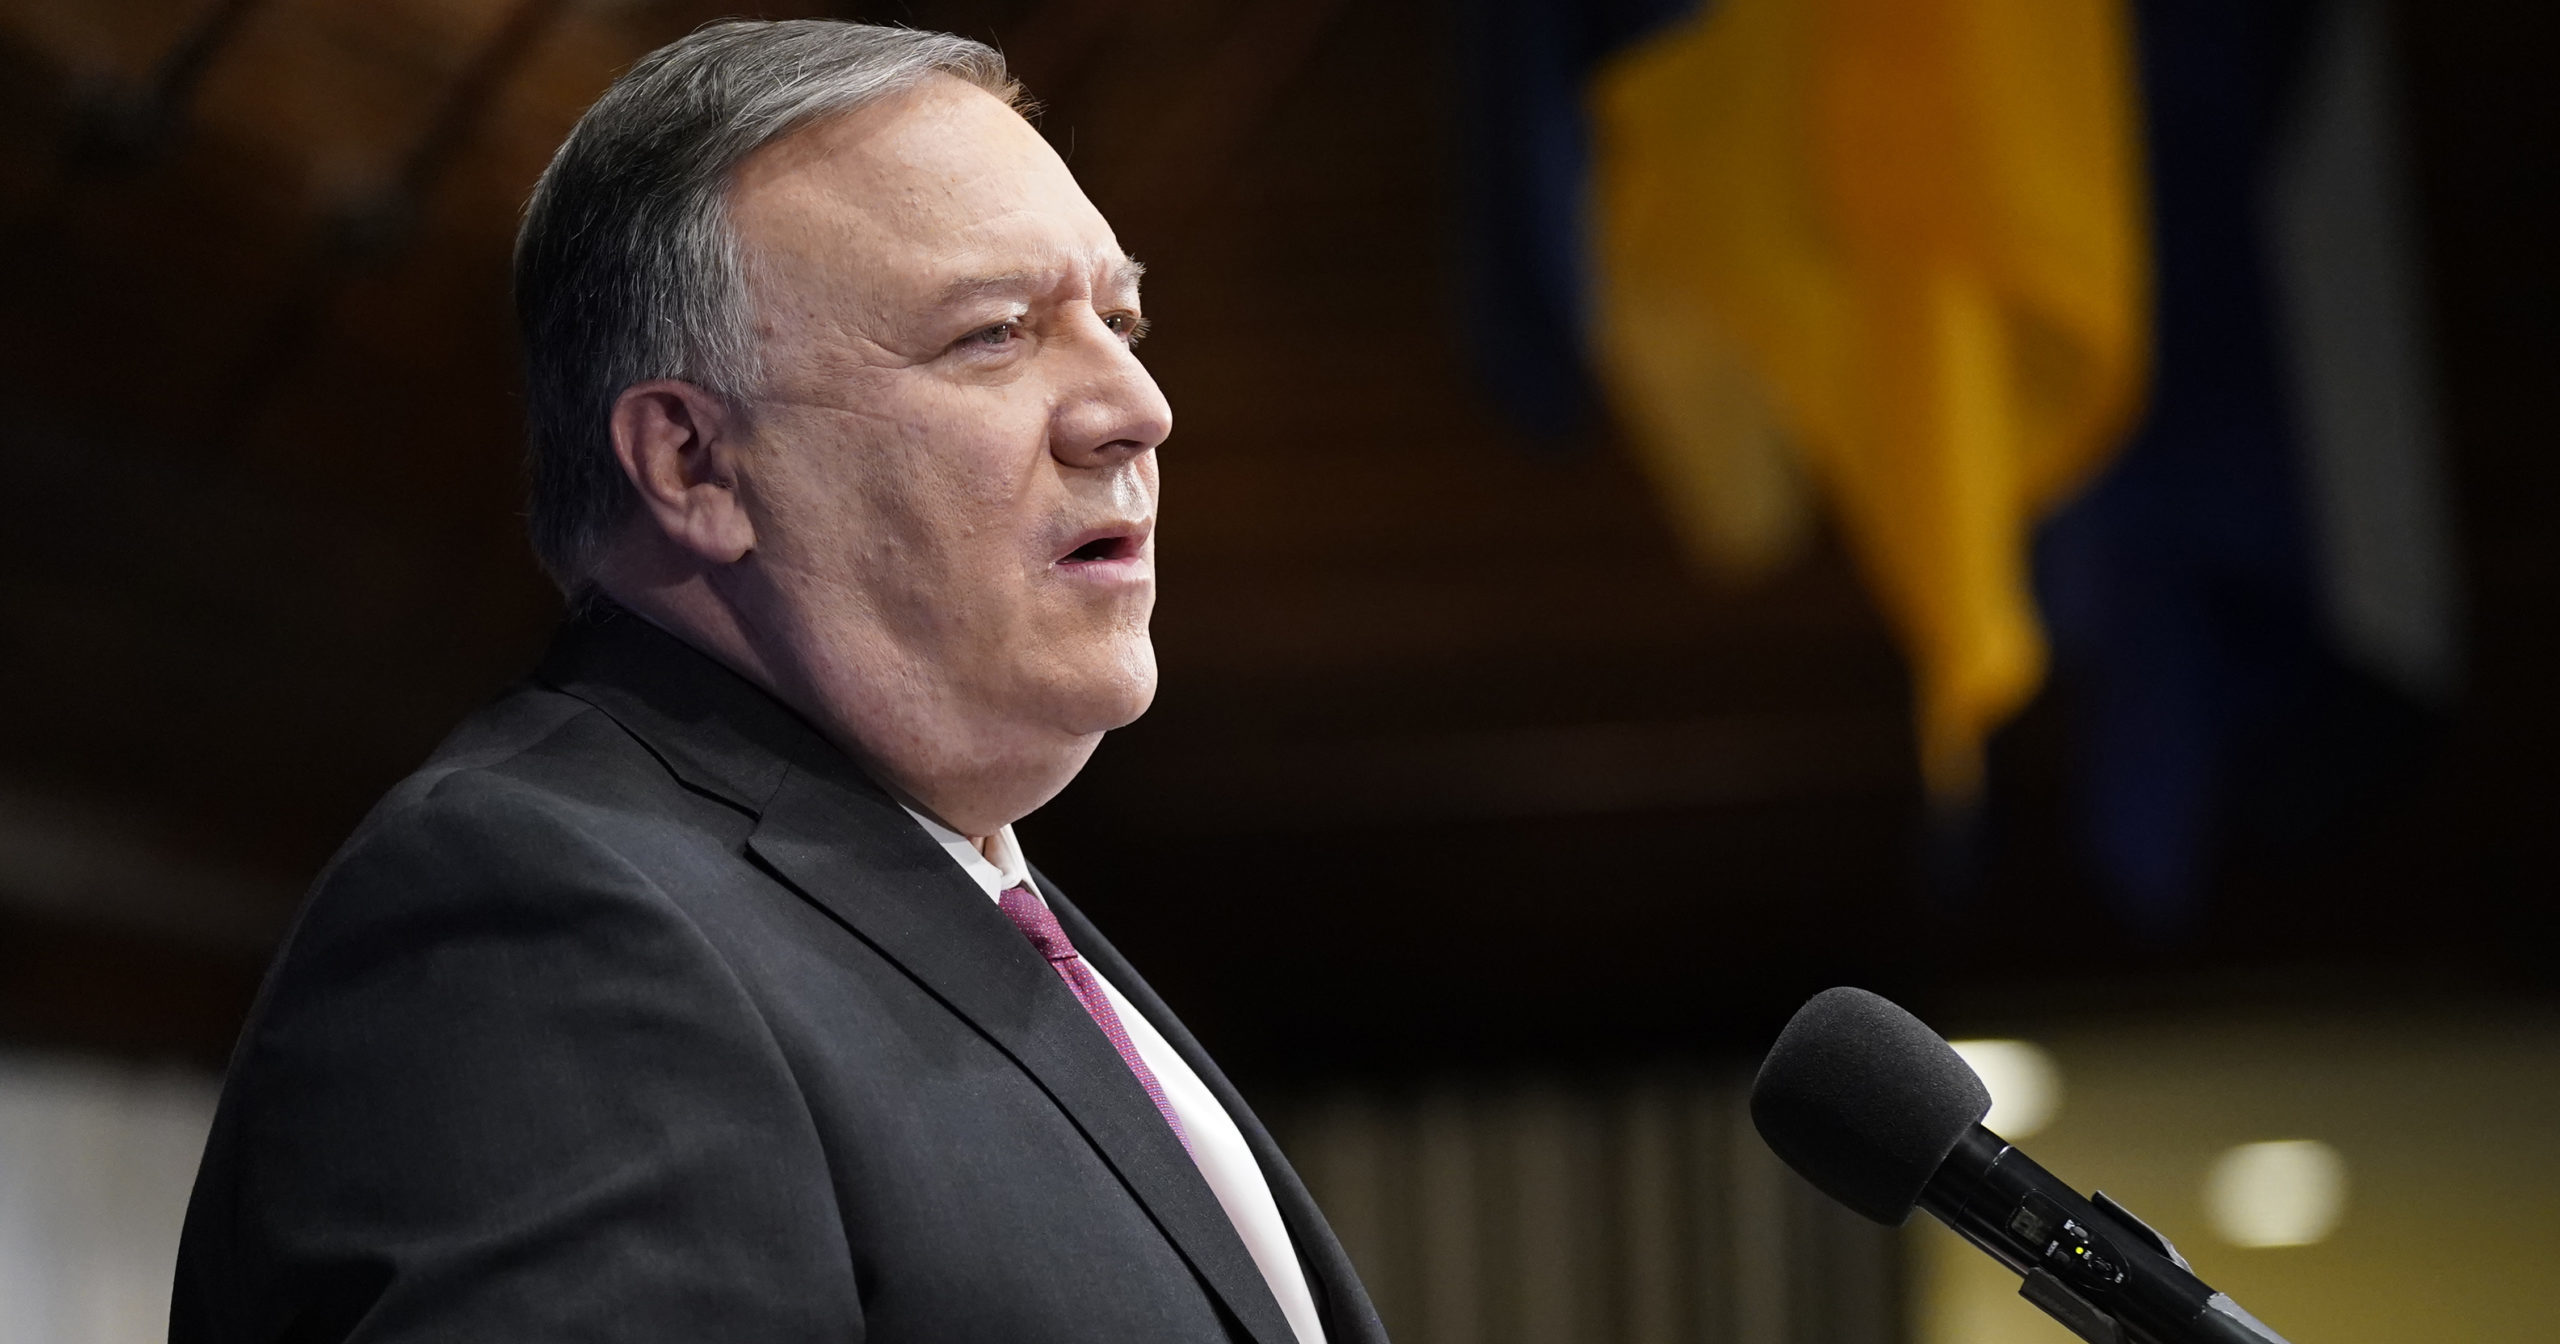 Secretary of State Mike Pompeo speaks at the National Press Club in Washington, D.C., on Jan. 12, 2021.